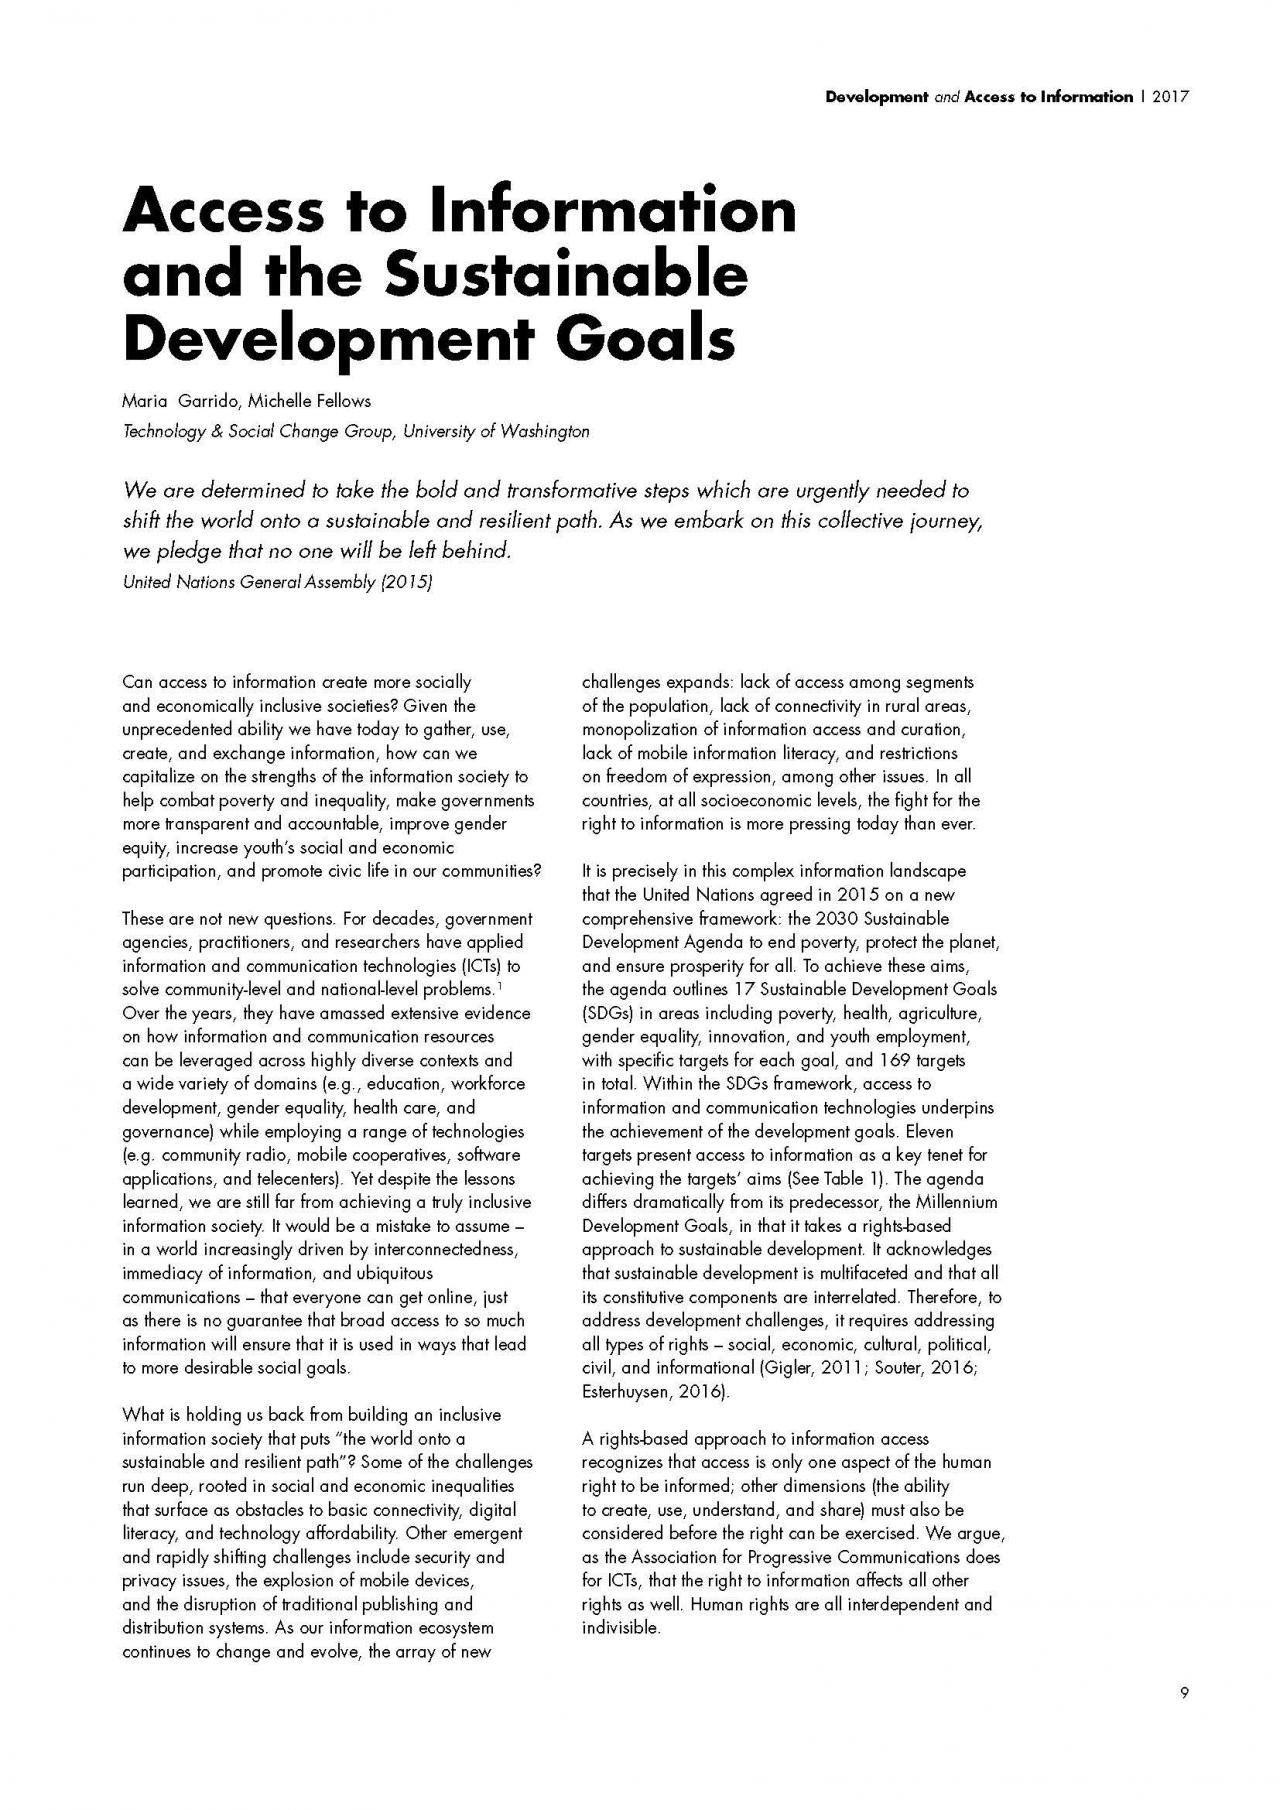 Introduction: Access to Information and the Sustainable Development Goals